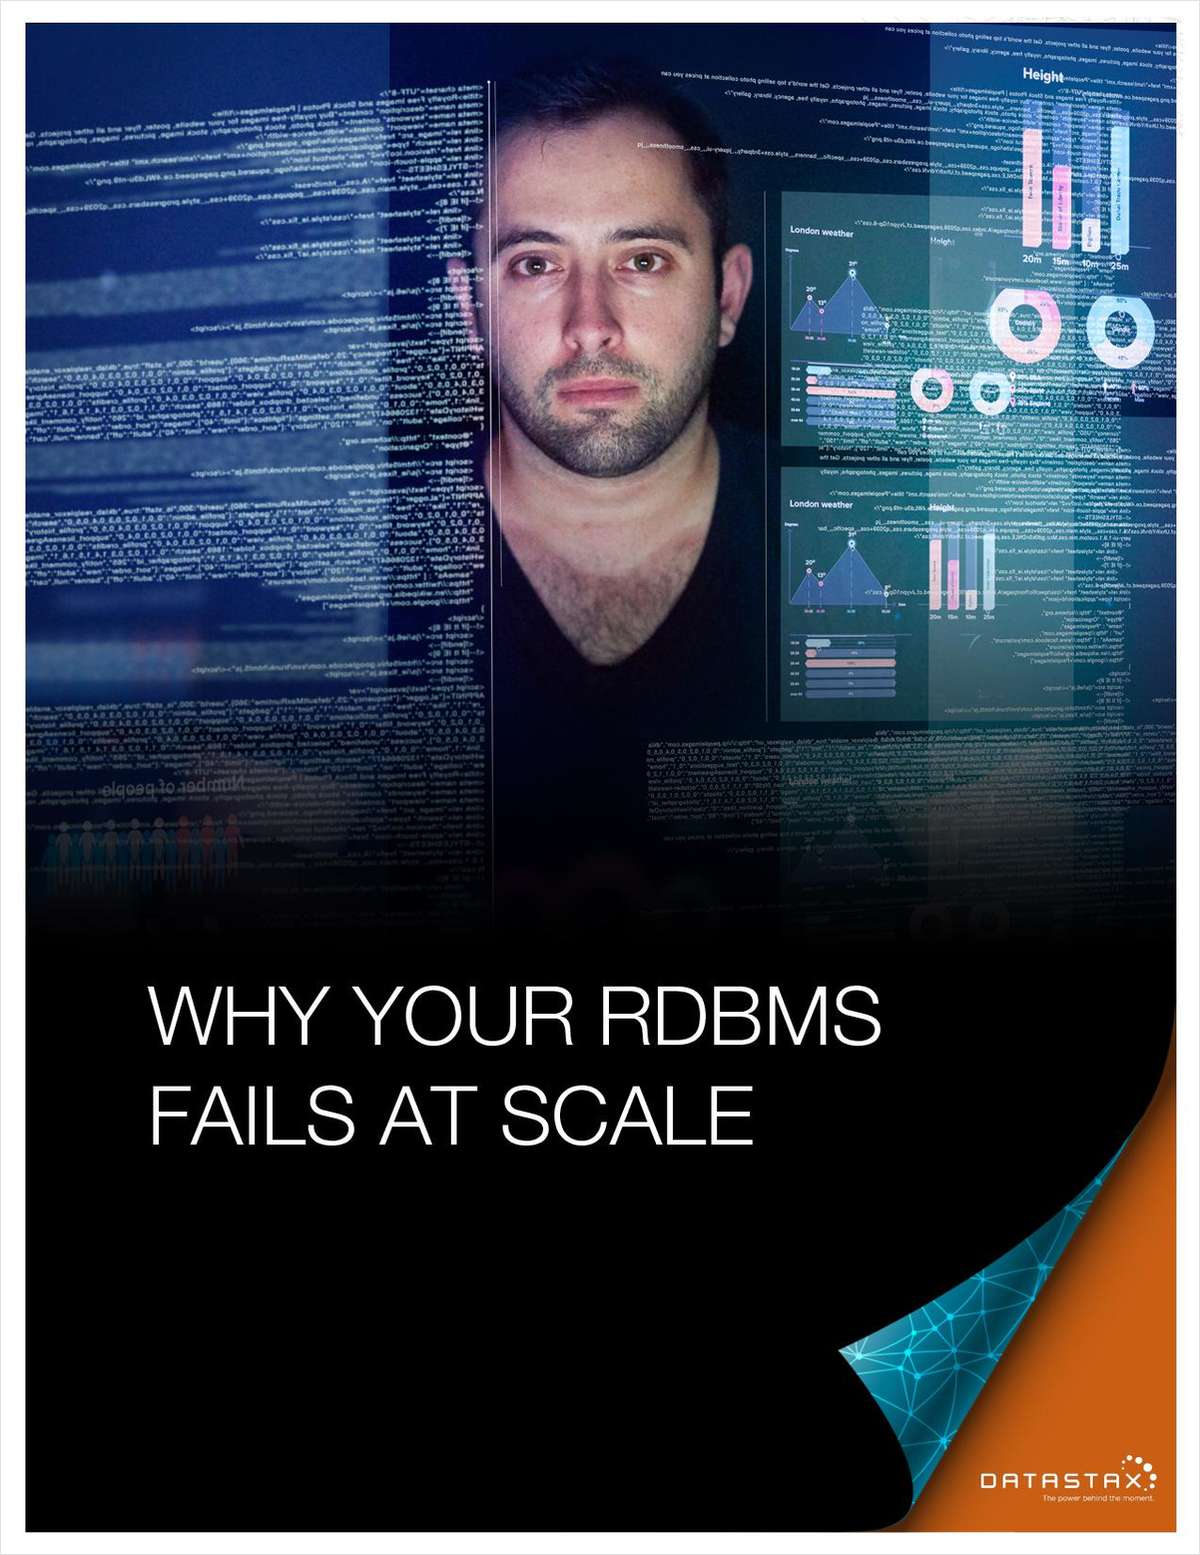 Why Your RDBMS Fails at Scale